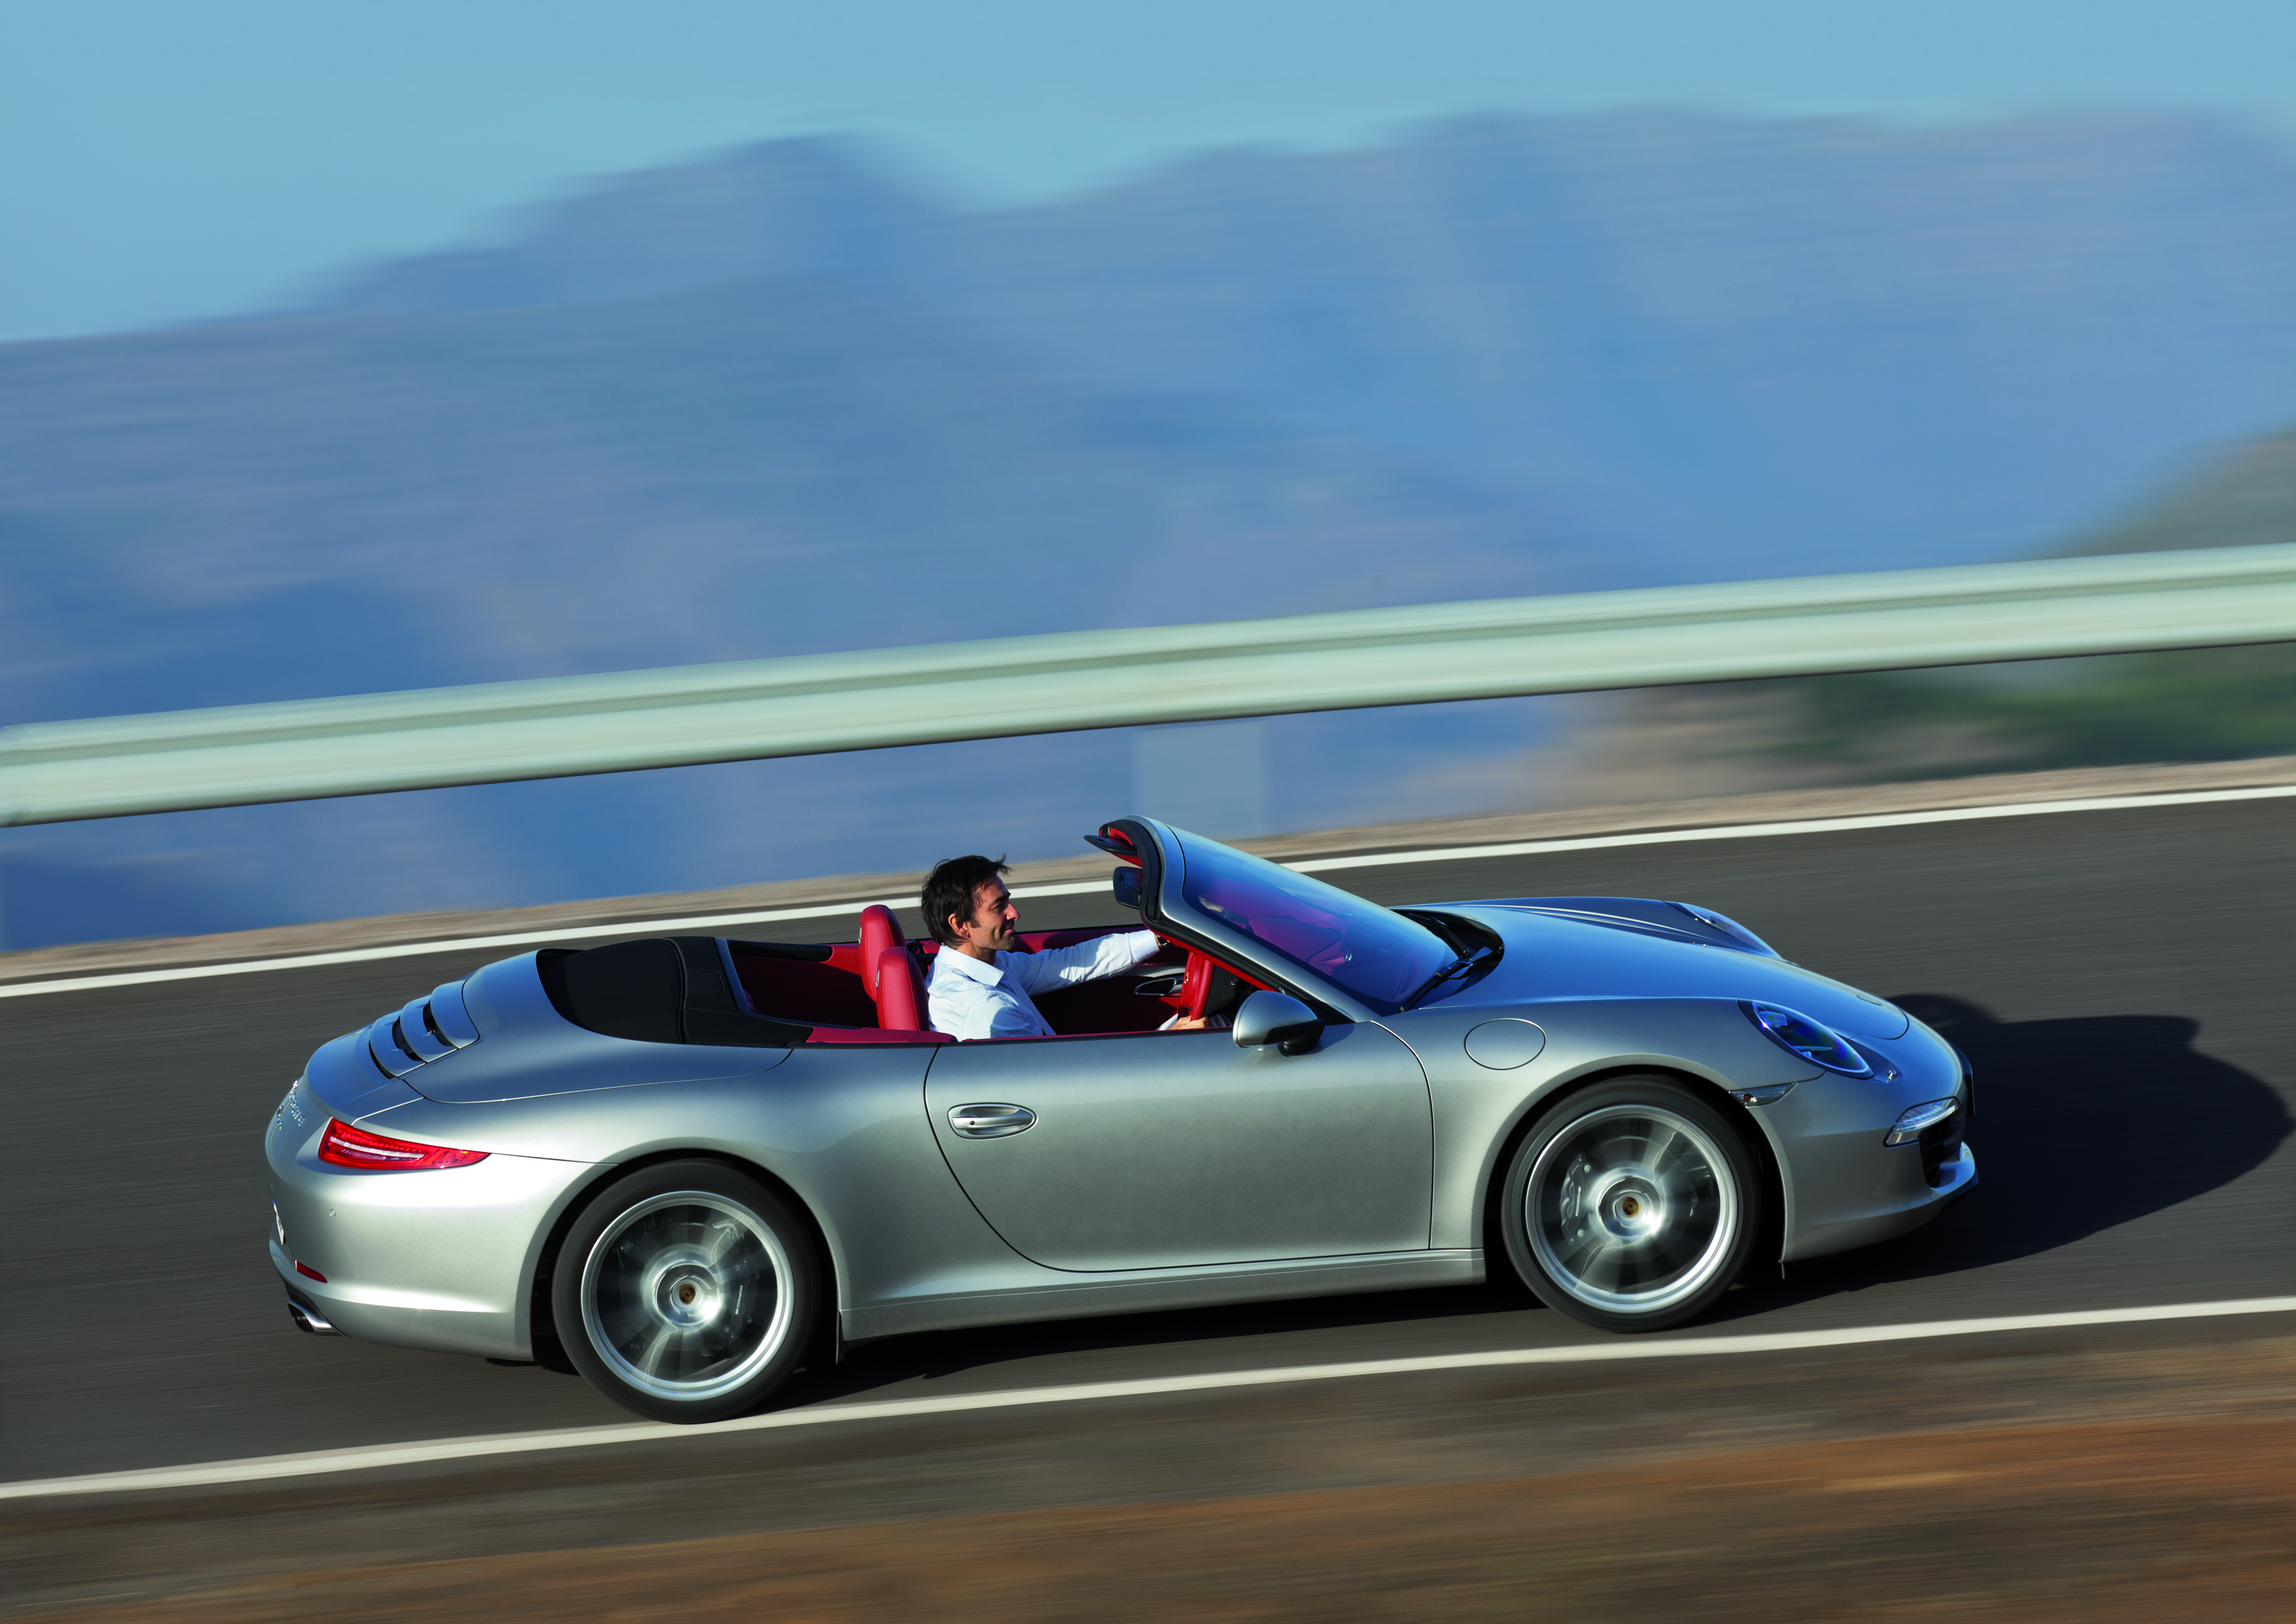 2012 All New Porsche 911 991 not 998 Model Official picture Carrera Cabriolet Simple Basic